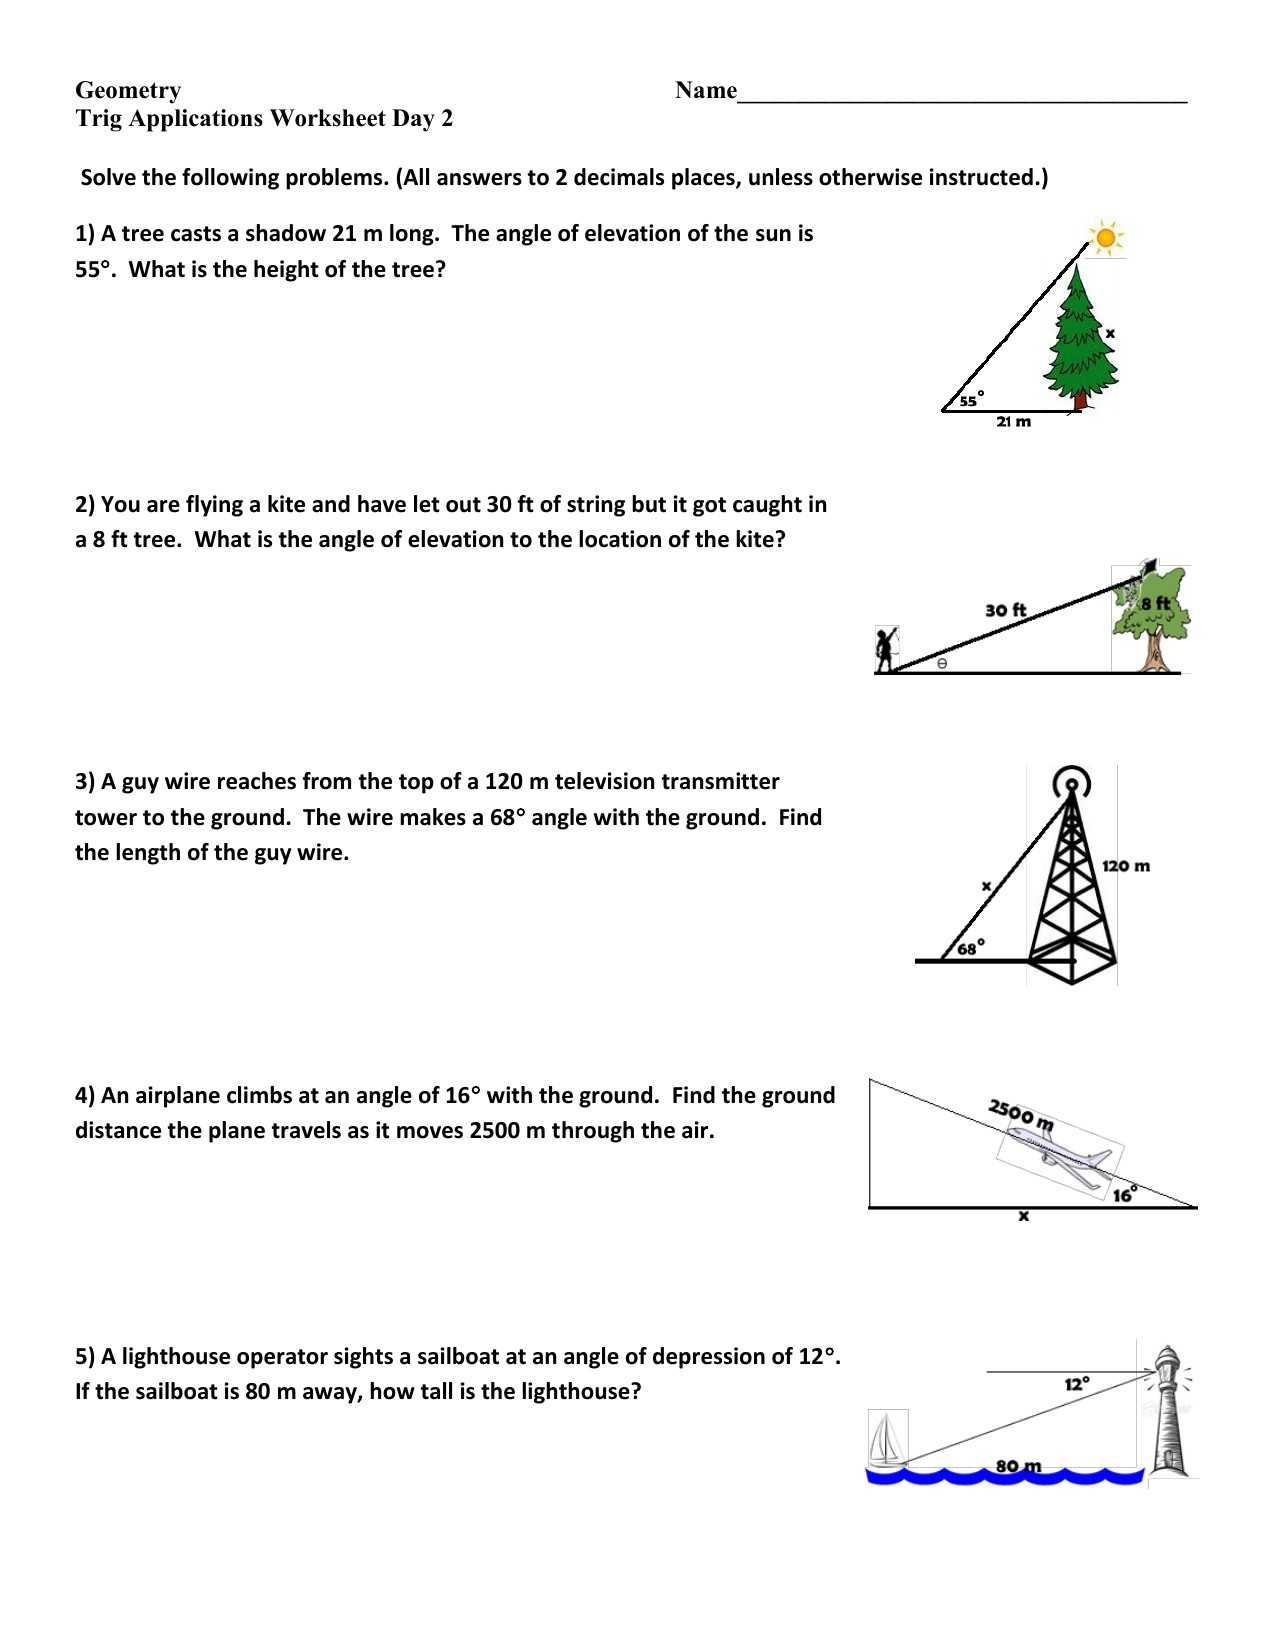 Geometry Worksheet Congruent Triangles Sss and Sas Answers together with Special Right Triangles Worksheet Answers Beautiful Worksheet